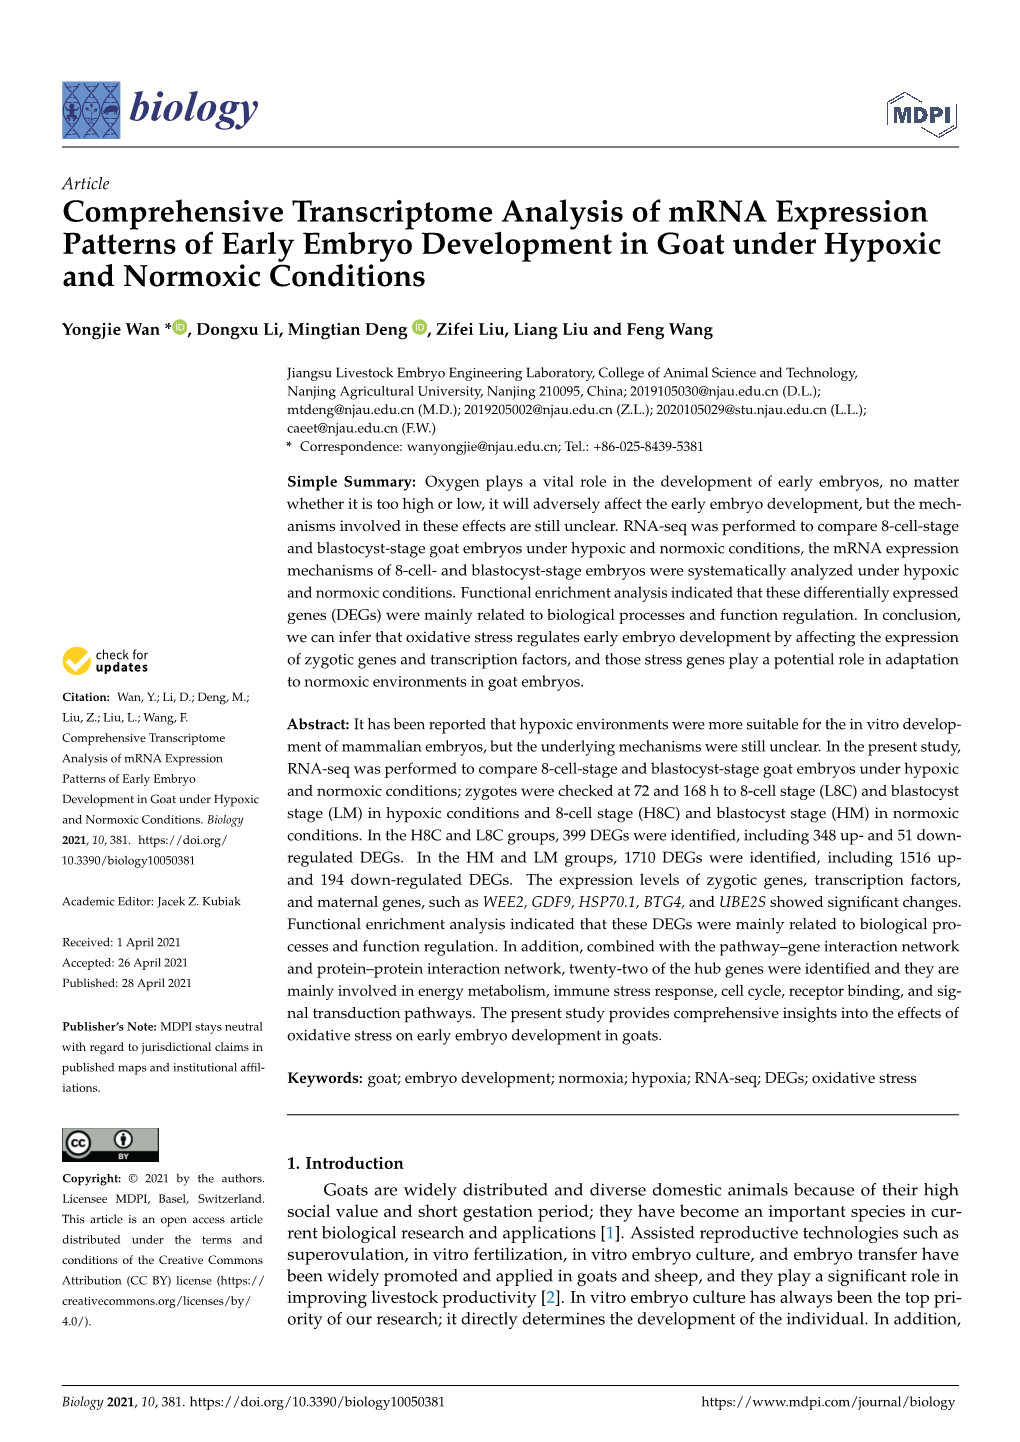 Comprehensive Transcriptome Analysis of Mrna Expression Patterns of Early Embryo Development in Goat Under Hypoxic and Normoxic Conditions